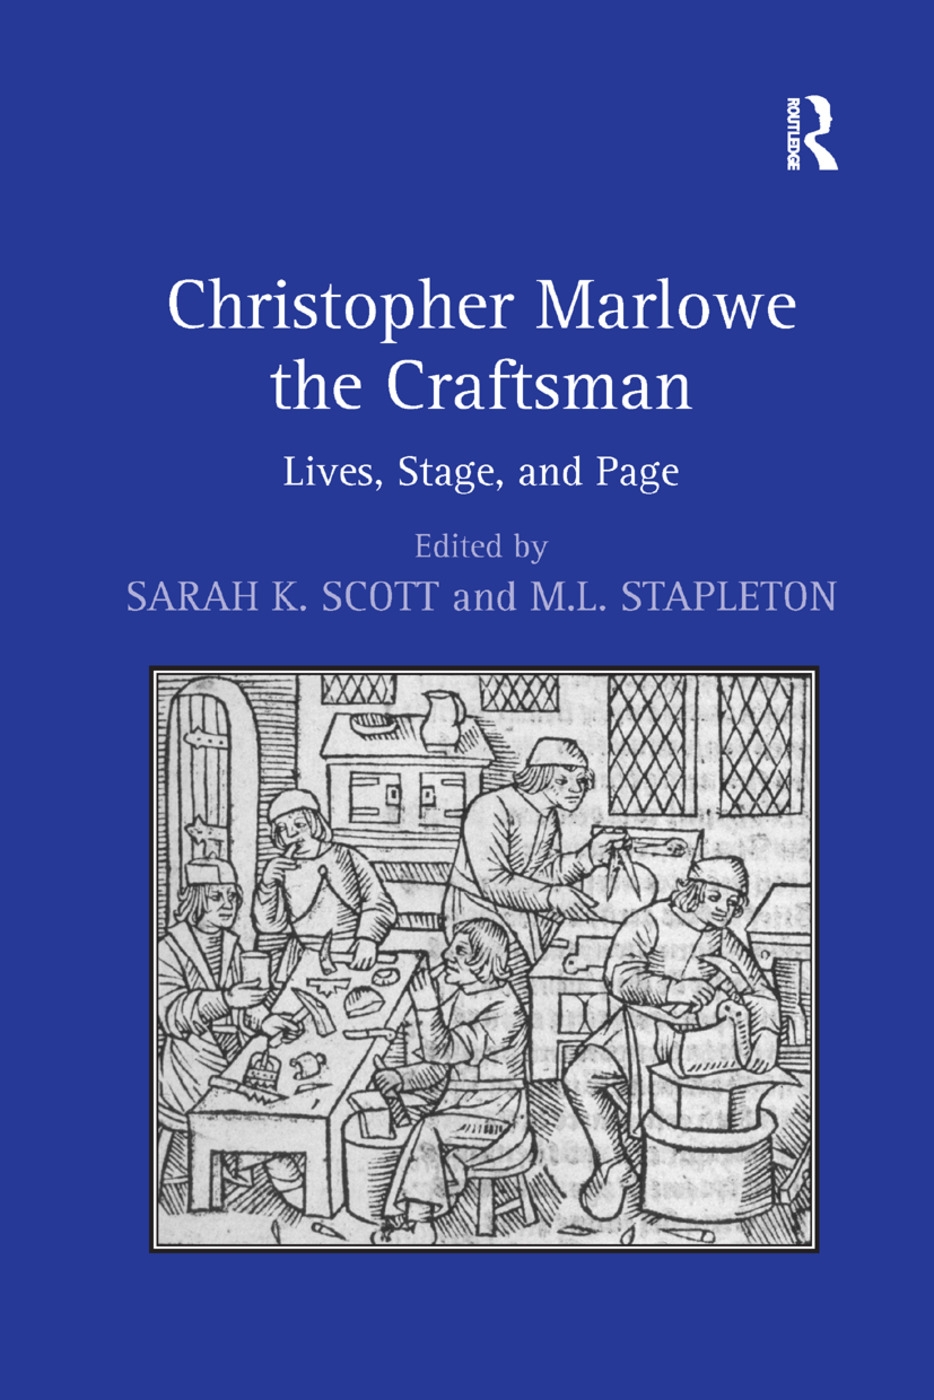 Christopher Marlowe the Craftsman: Lives, Stage, and Page